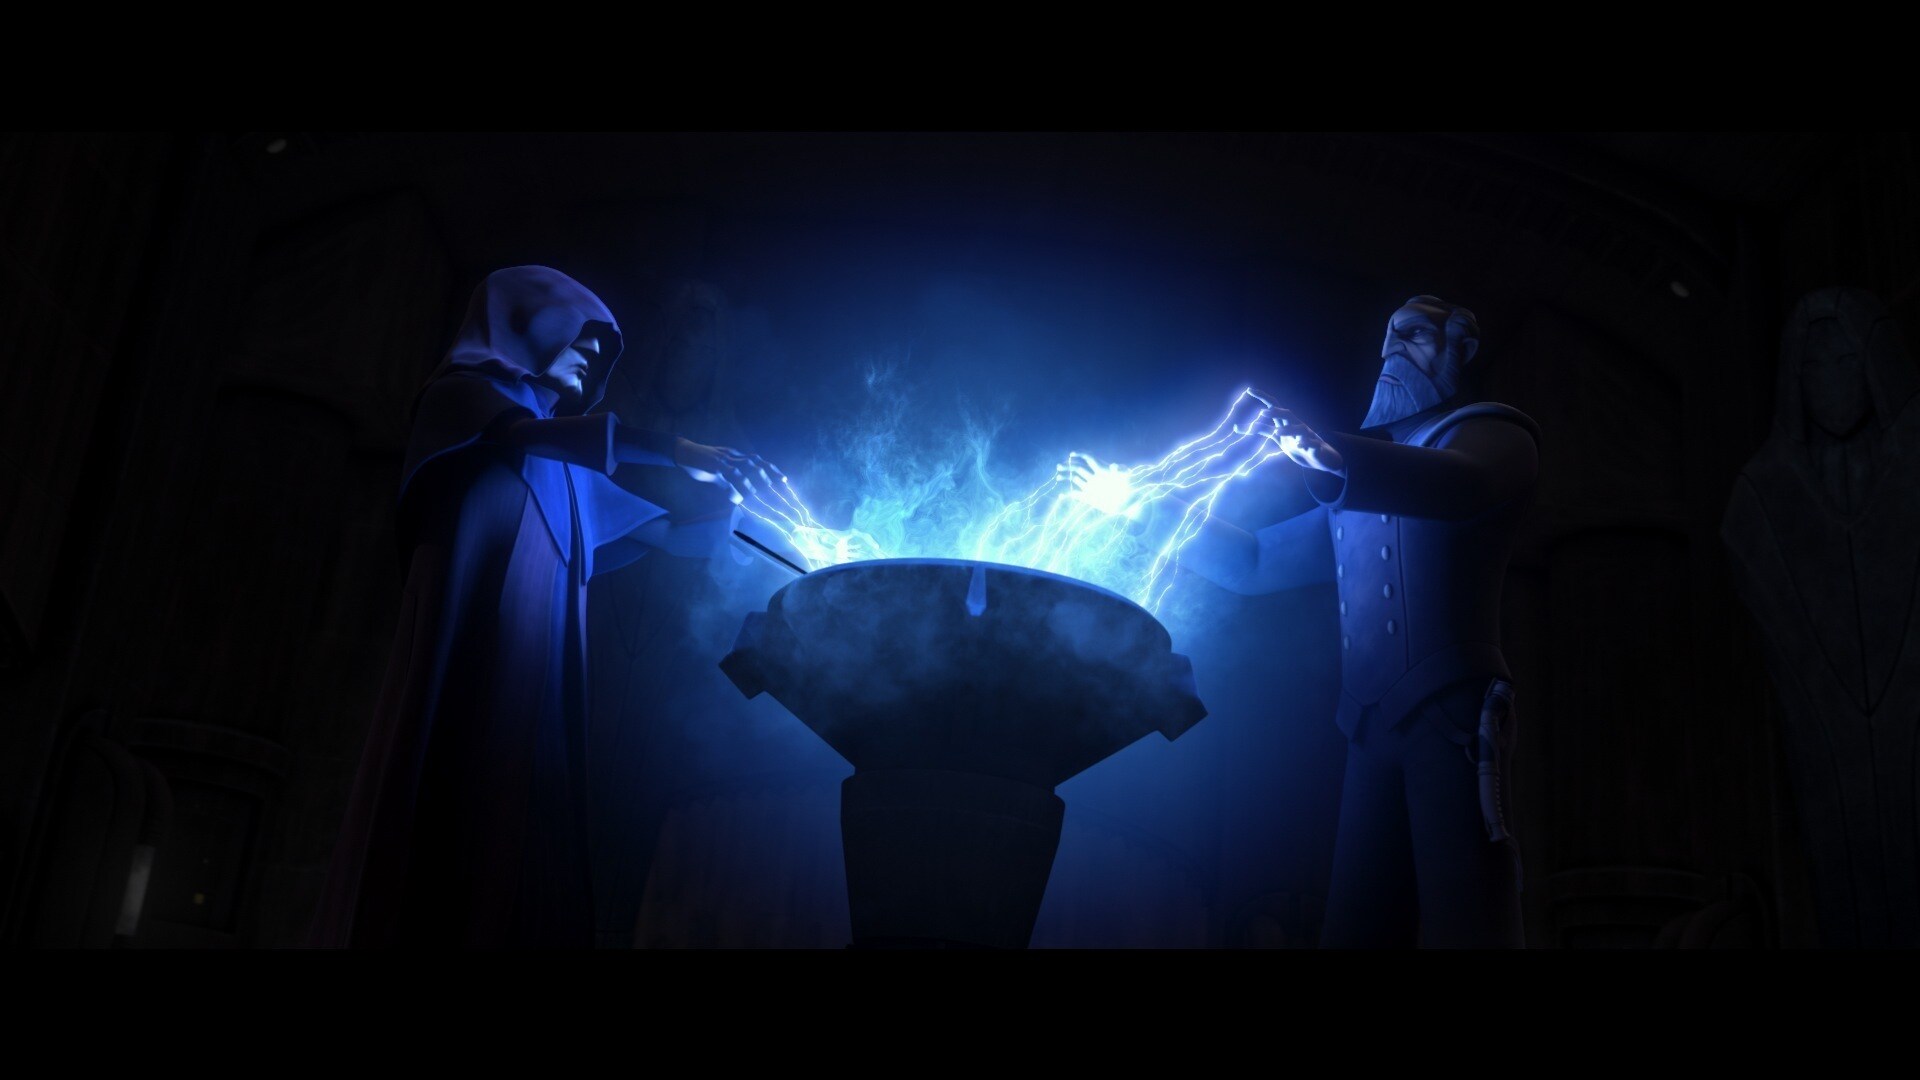 Producing a knife, Sidious cuts Dooku's hand, allowing a single drop of blood to fall into the wa...